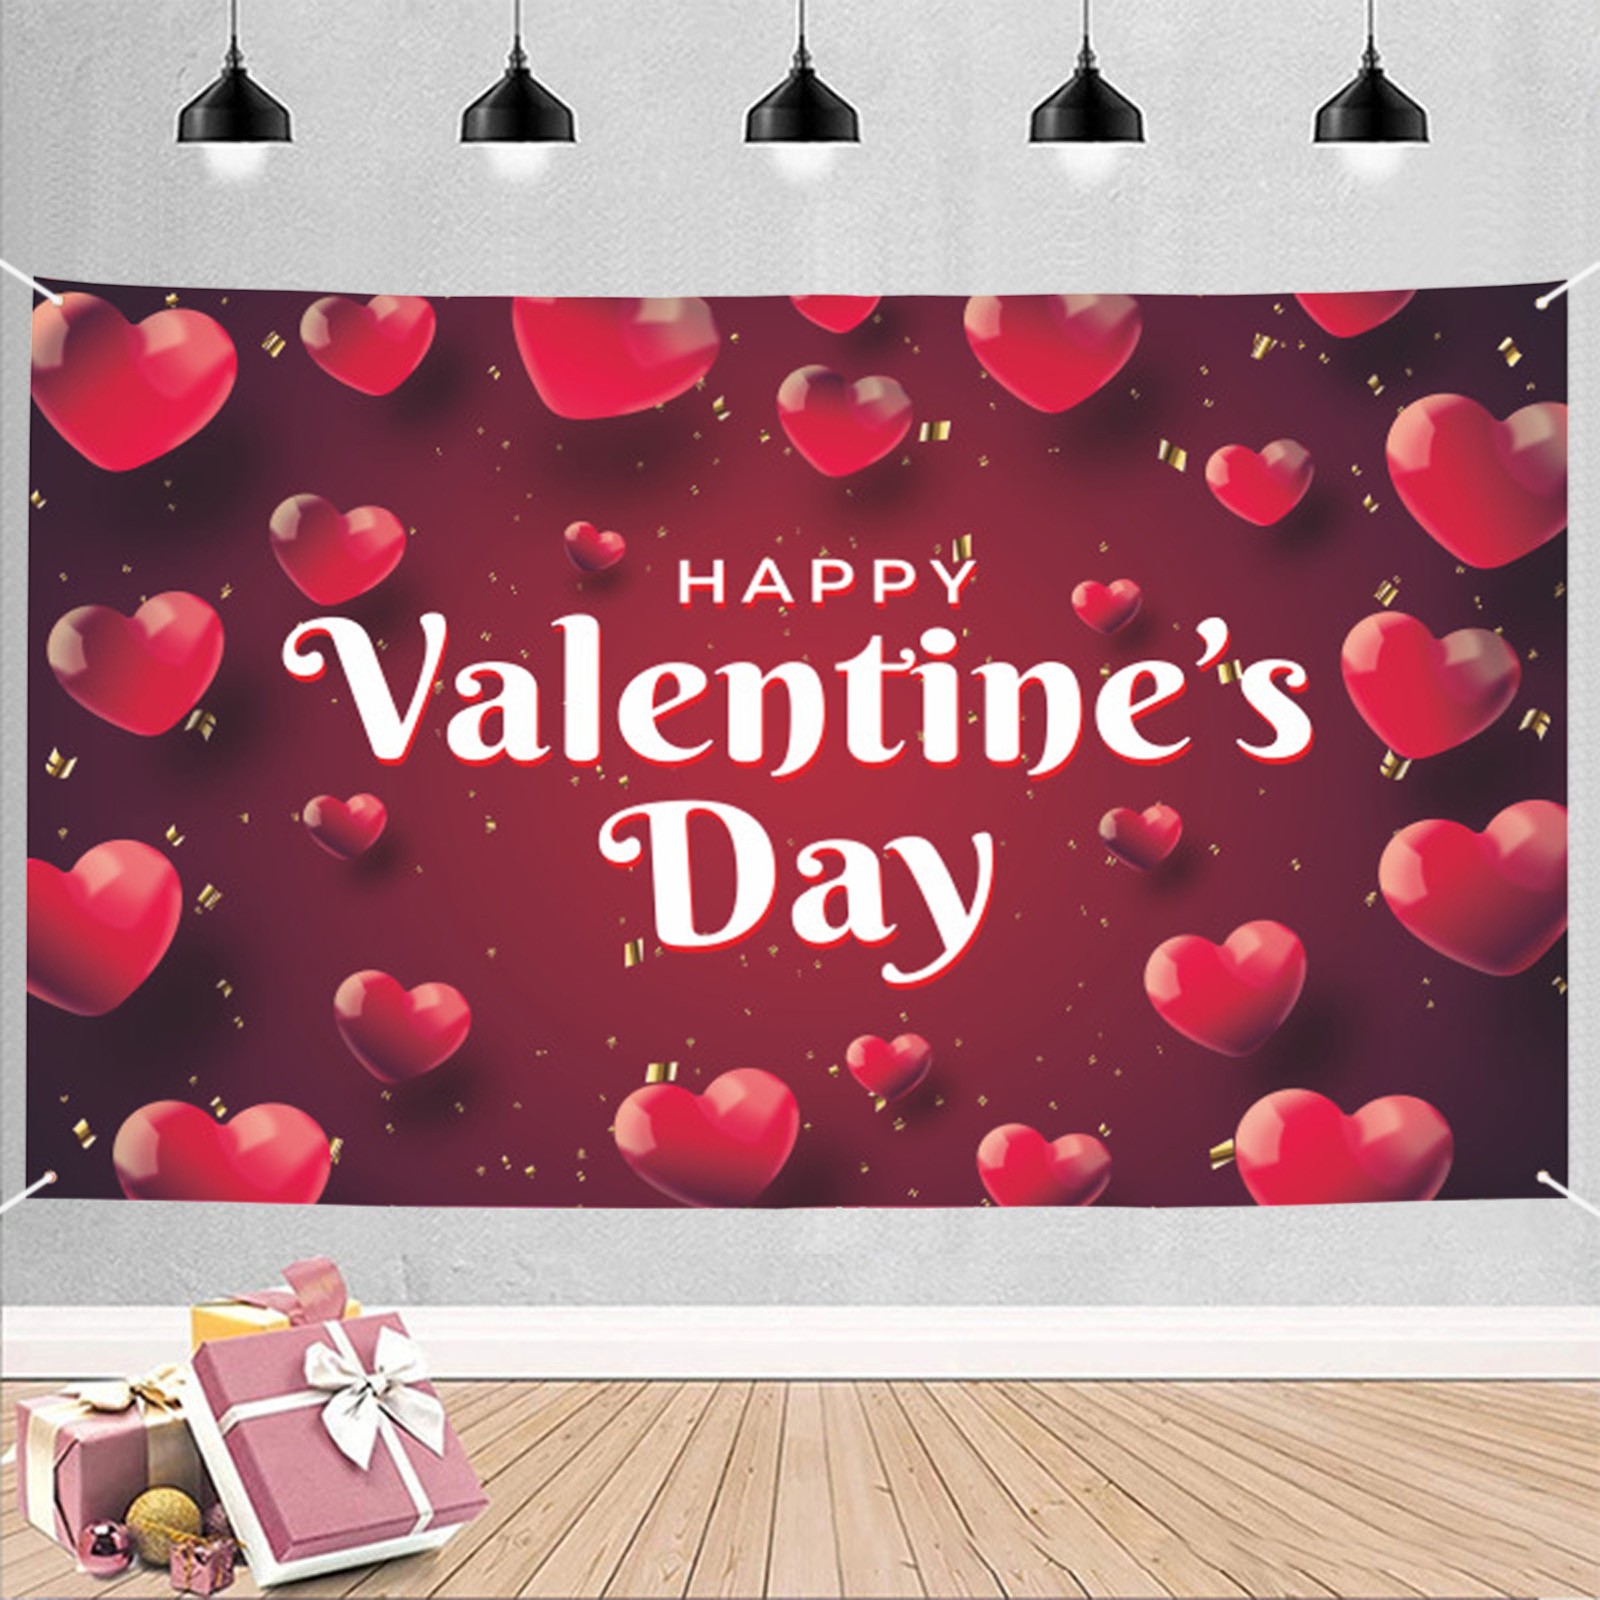 Valentine S Day 2024 New Background Cloth Photo Banner Party Layout Banners Clear Shower Curtain Heavy Duty E69a3077 1d4a 4a14 Acbd 00f584b57f1d.d83d6d17c8820eff5b46022aebf4d8ea ?odnHeight=117&odnWidth=117&odnBg=FFFFFF